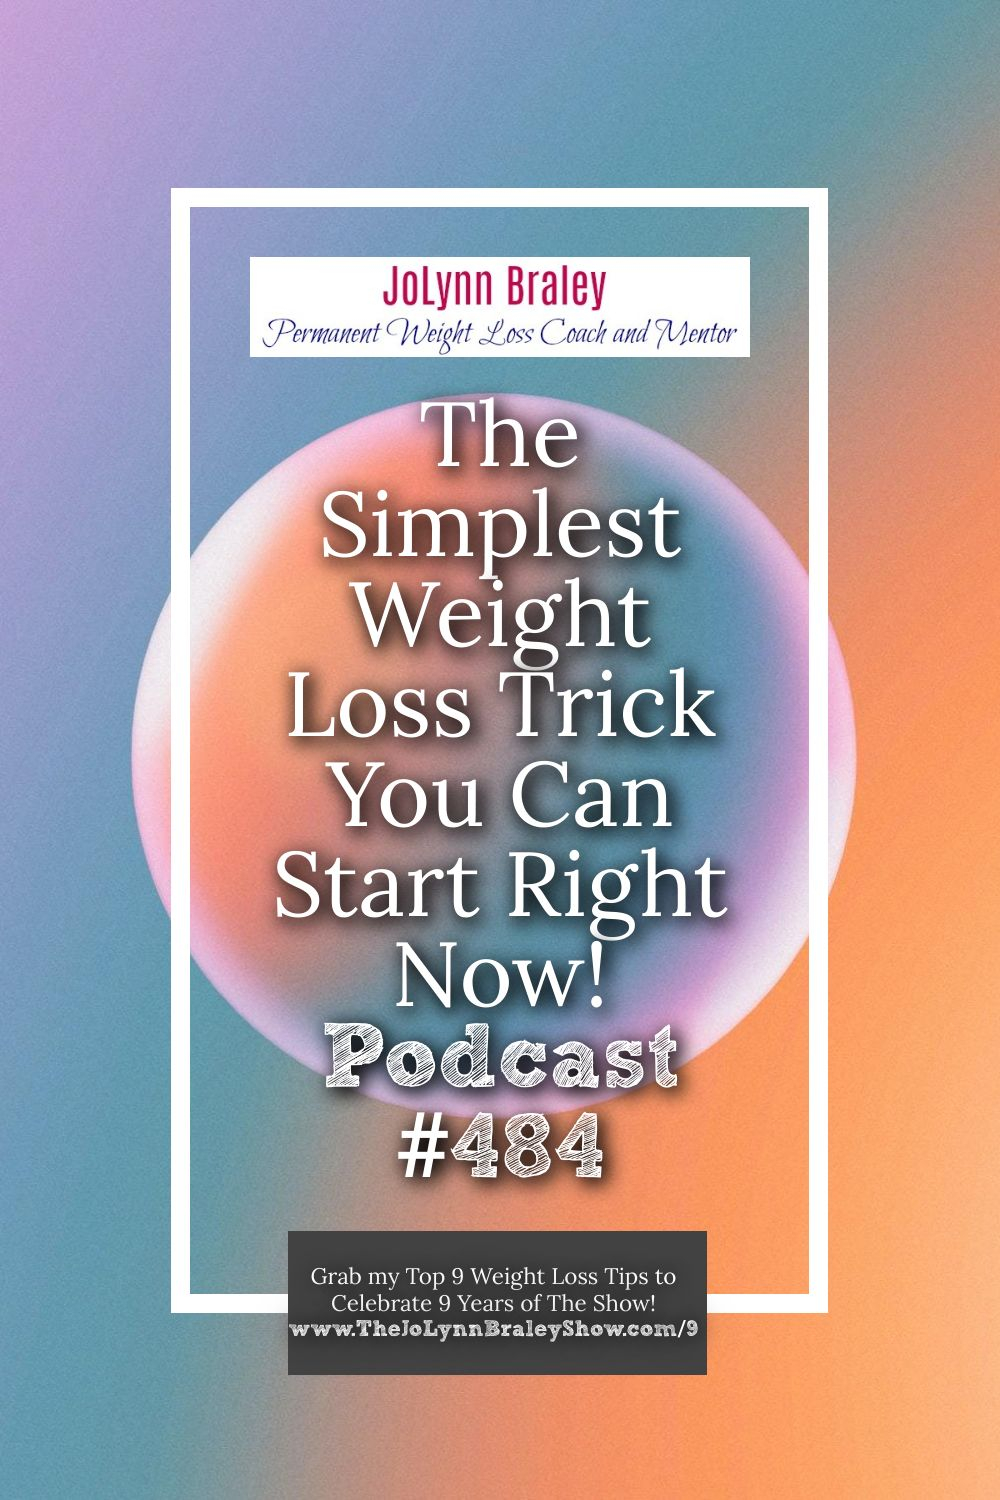 The Simplest Weight Loss Trick You Can Start Right Now! [Podcast #484]